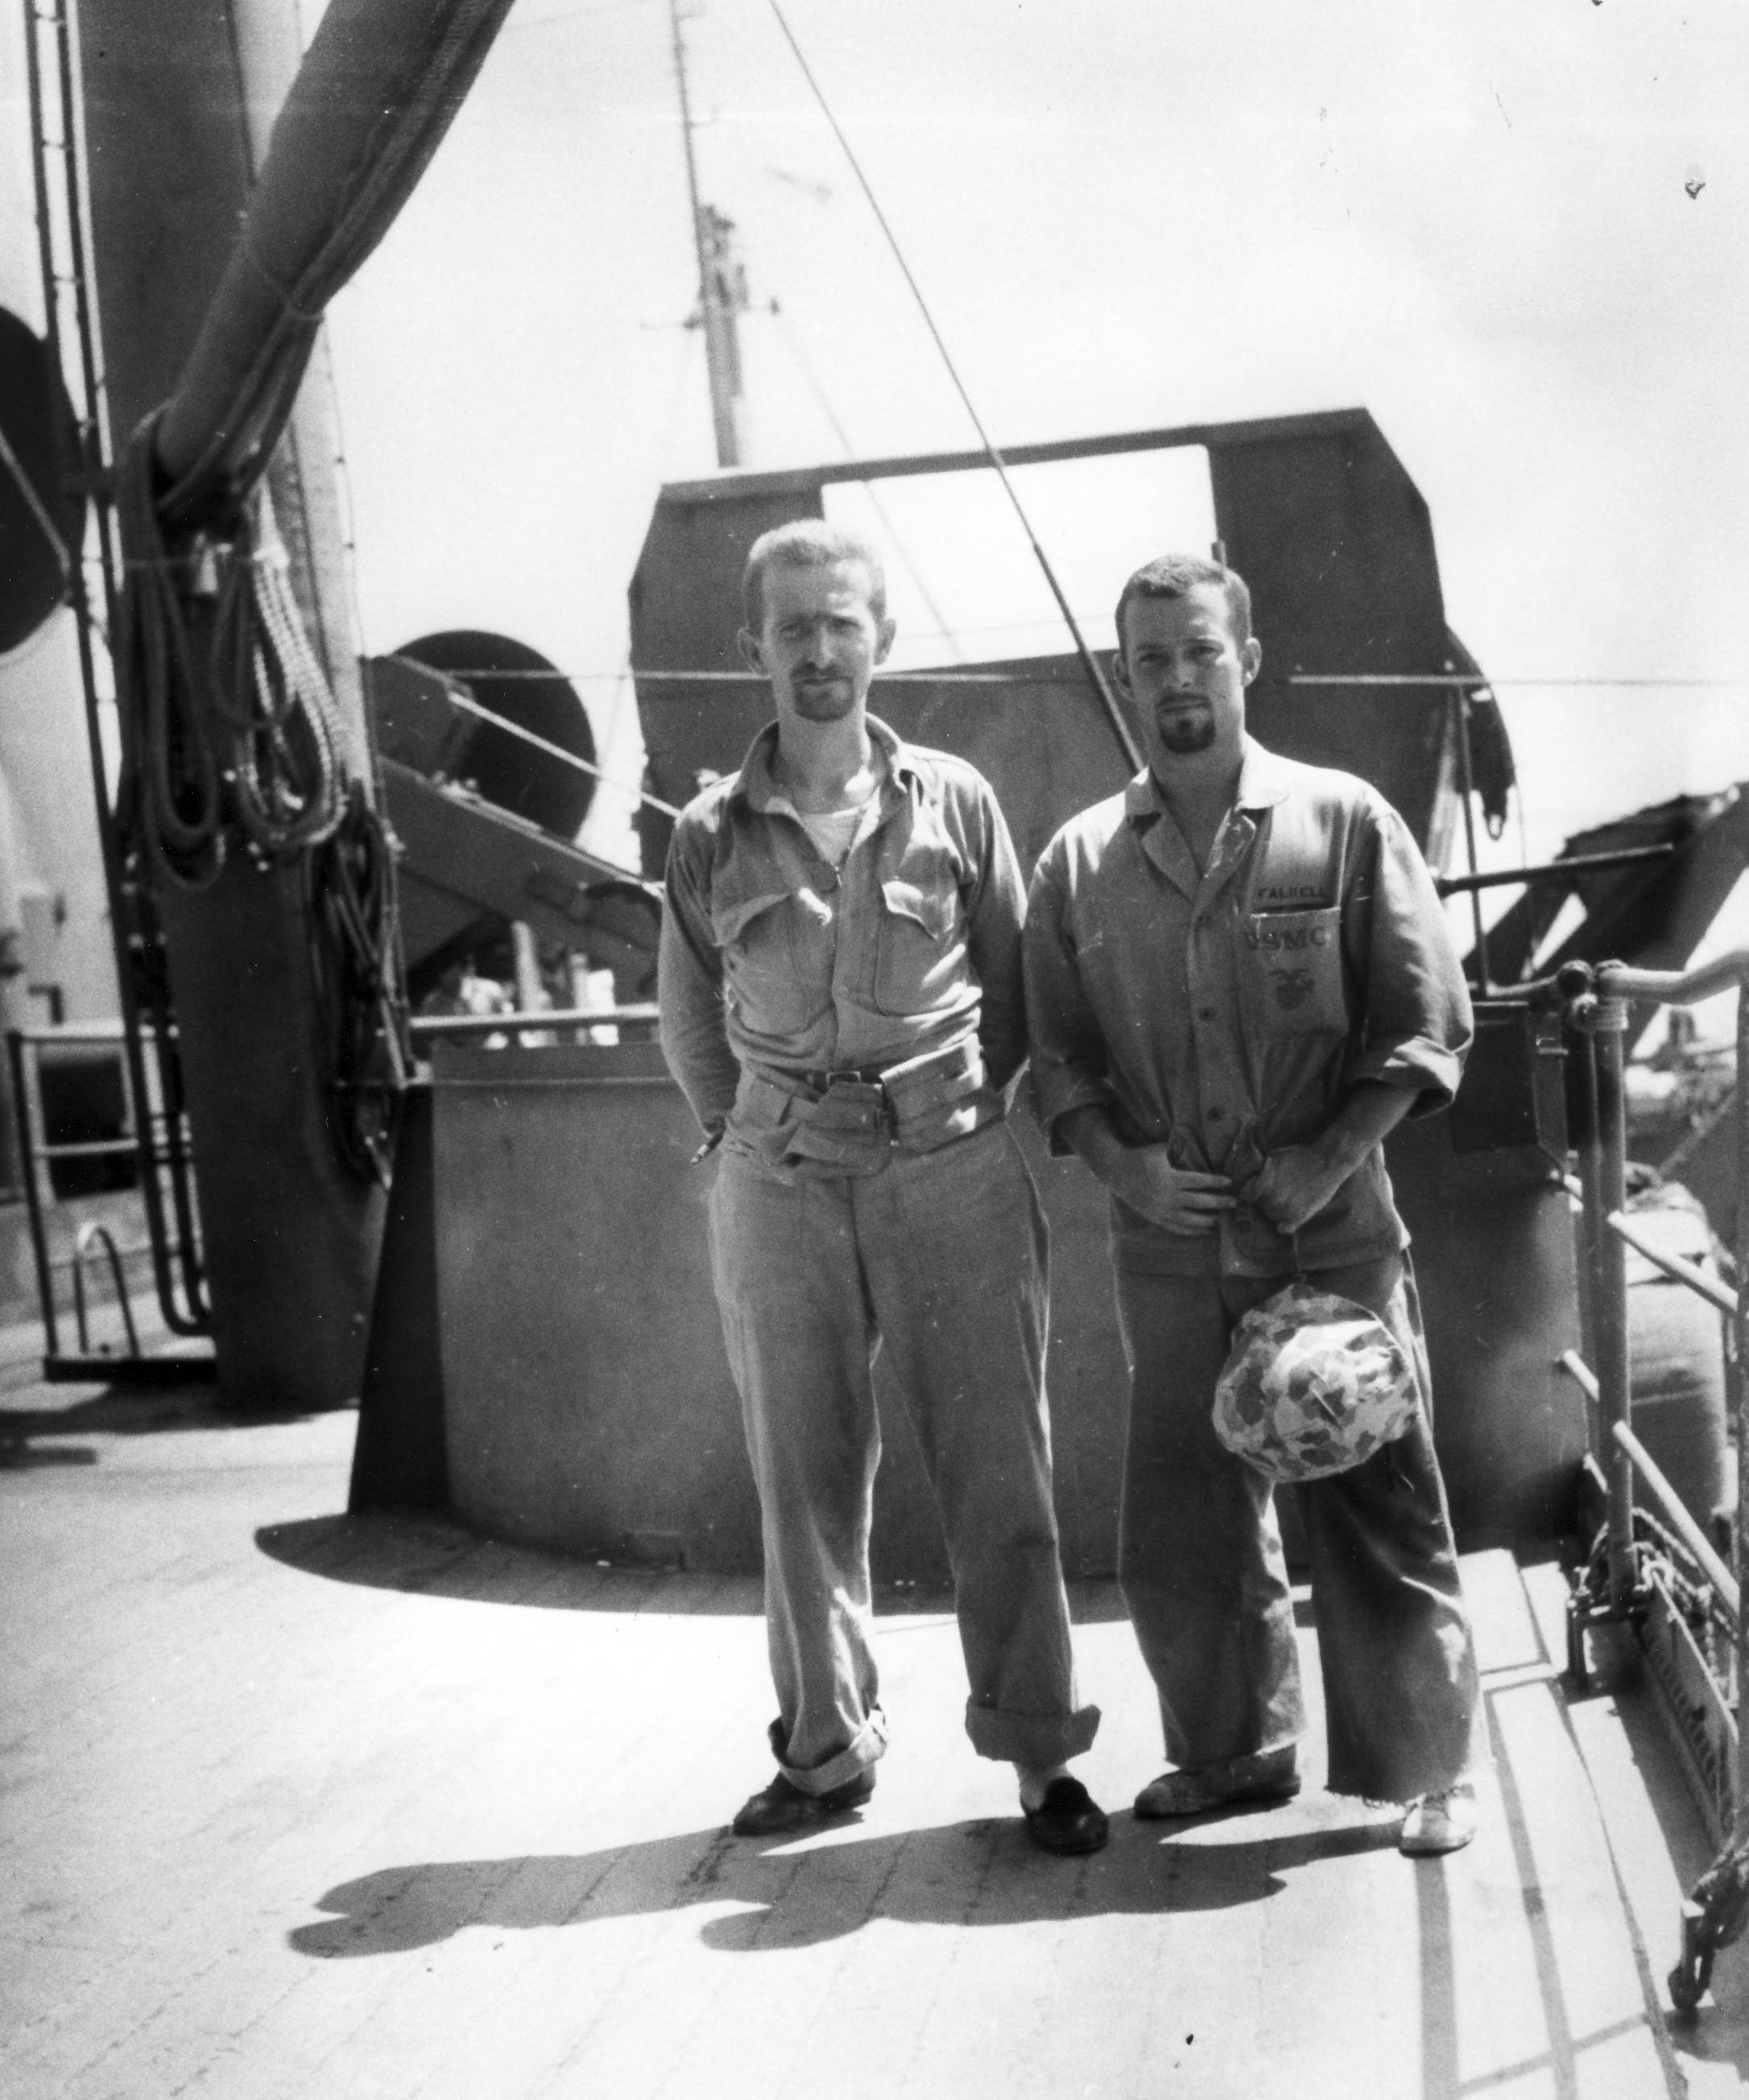 Matthews, on left, aboard the USS Biddle en route to Tarawa. (His companion, "Falwell," is a bit of a puzzle as that surname does not appear on muster rolls of the period.) Photograph by Norm Hatch. [Source]